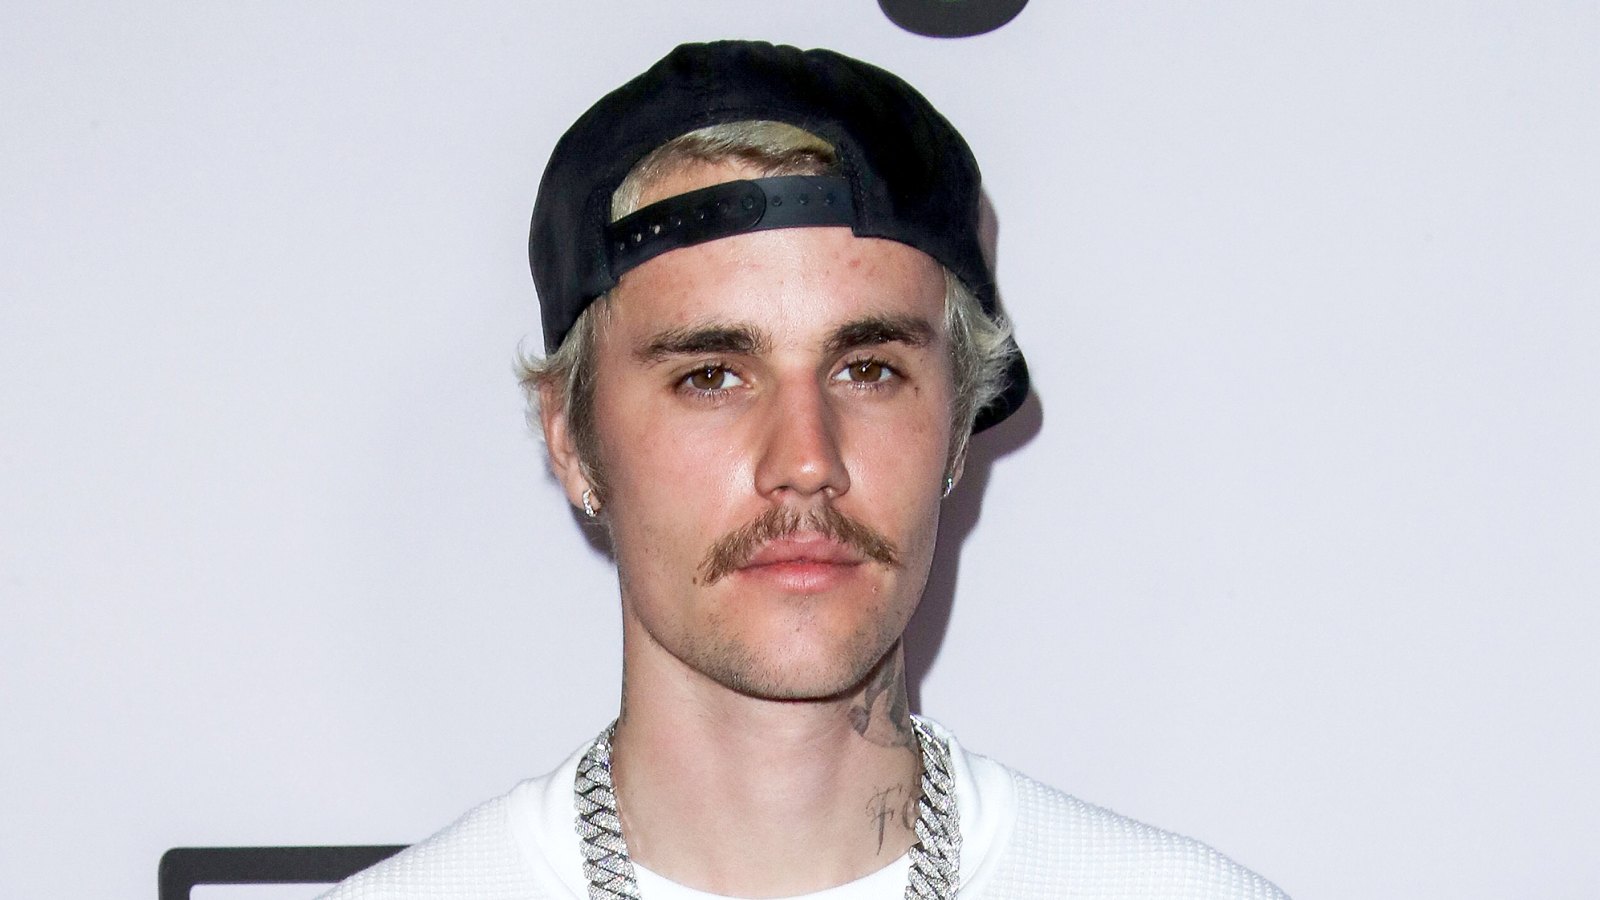 Justin-Bieber's-Security-Team-Would-Check-His-Pulse-During-Drug-Use